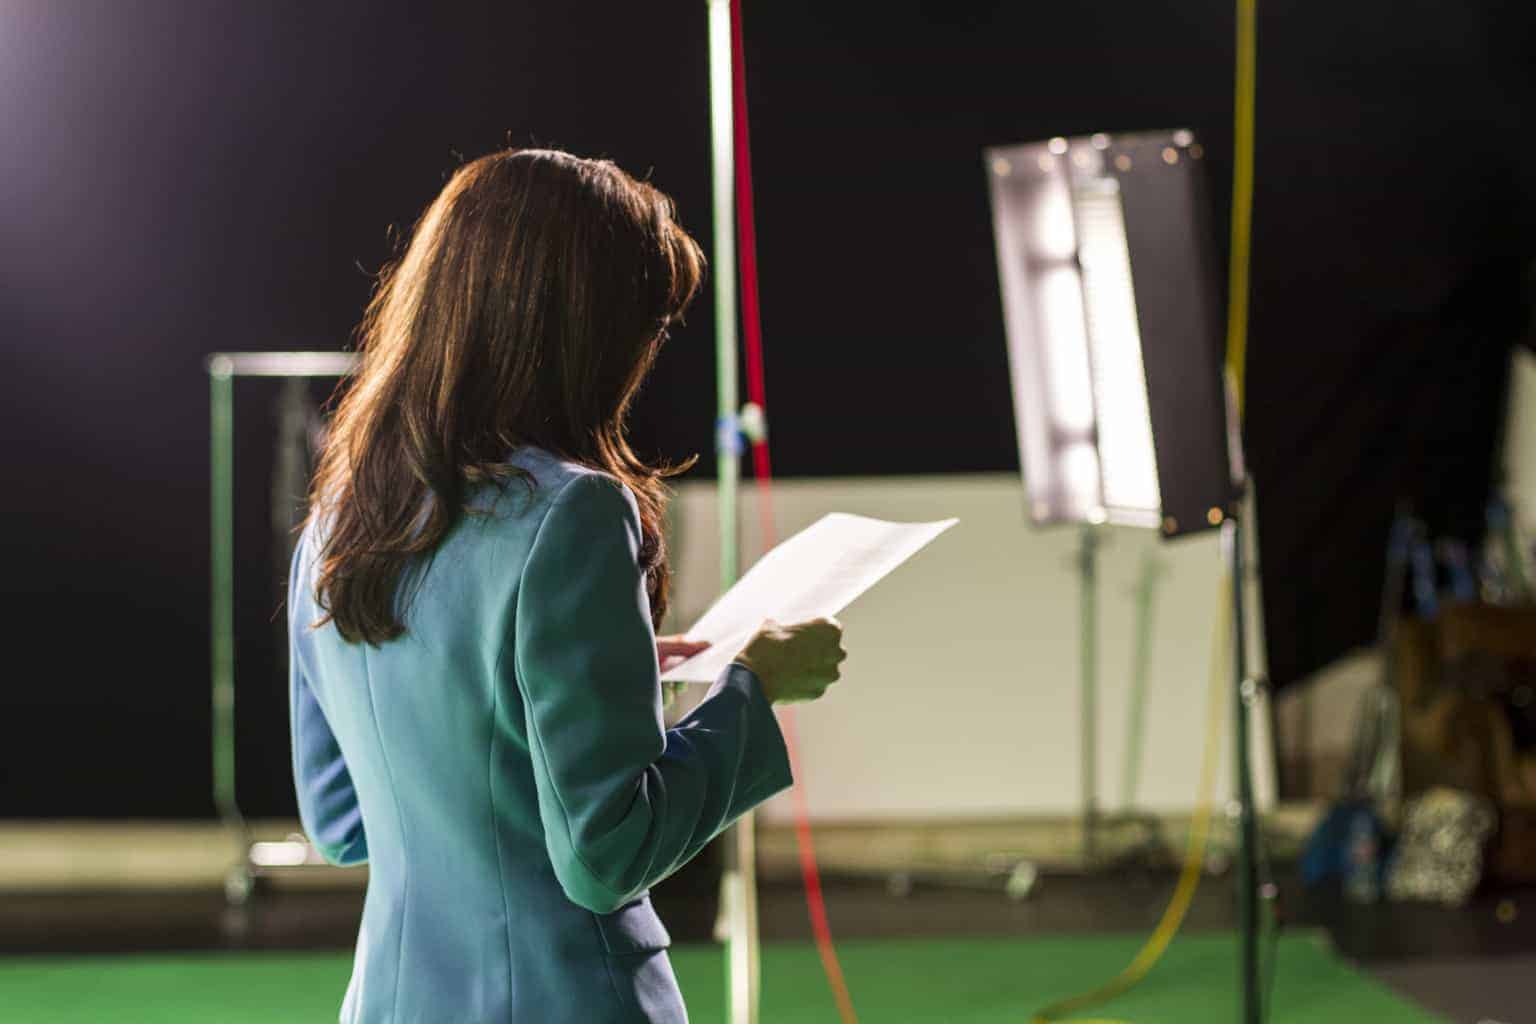 How to Write a Killer Video Script for Your Business